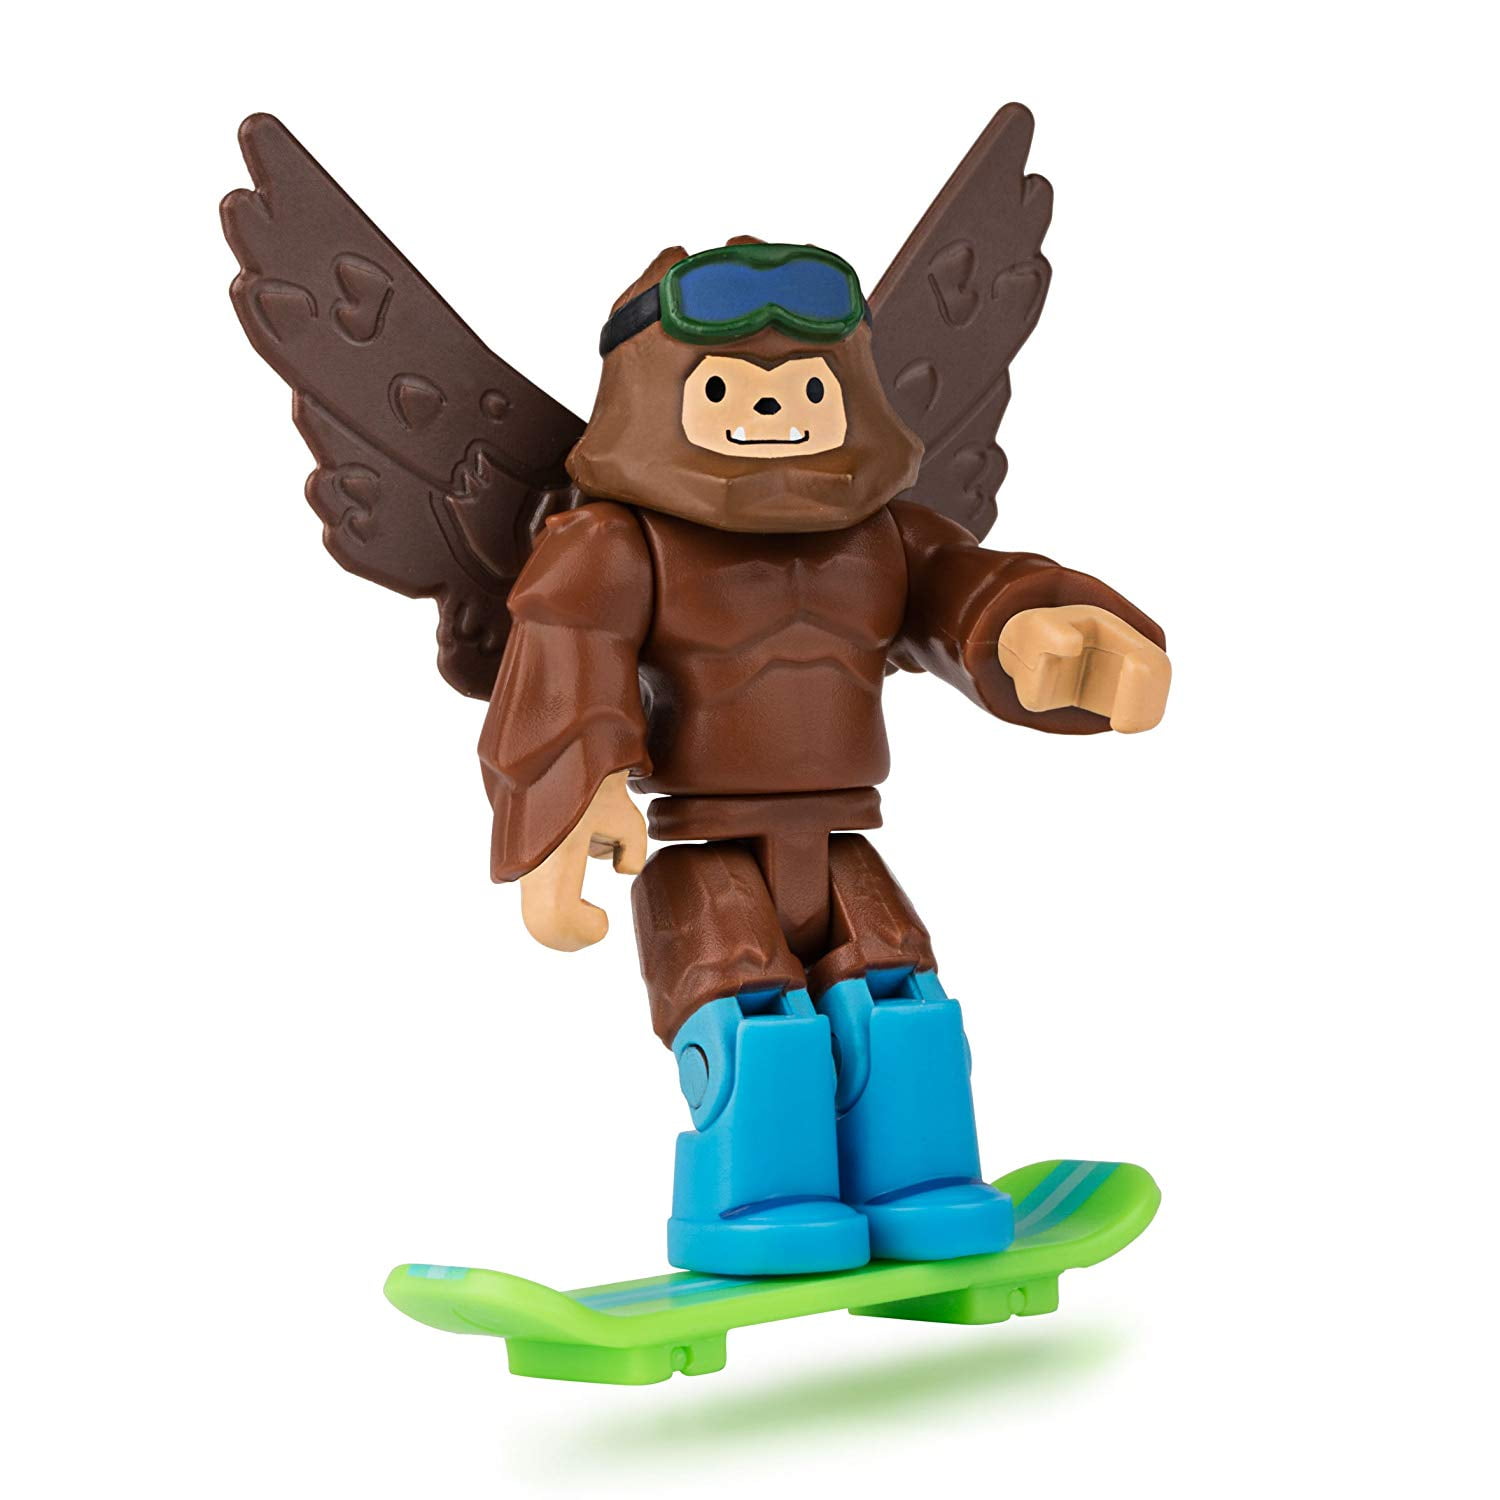 Bigfoot Boarder Airtime Figure With Exclusive Virtual Item Game Code Roblox Bigfoot Boarder Airtime Figure Packwalmartes With One Figure By - roblox bigfoot boarder airtime mini figure and 50 similar items